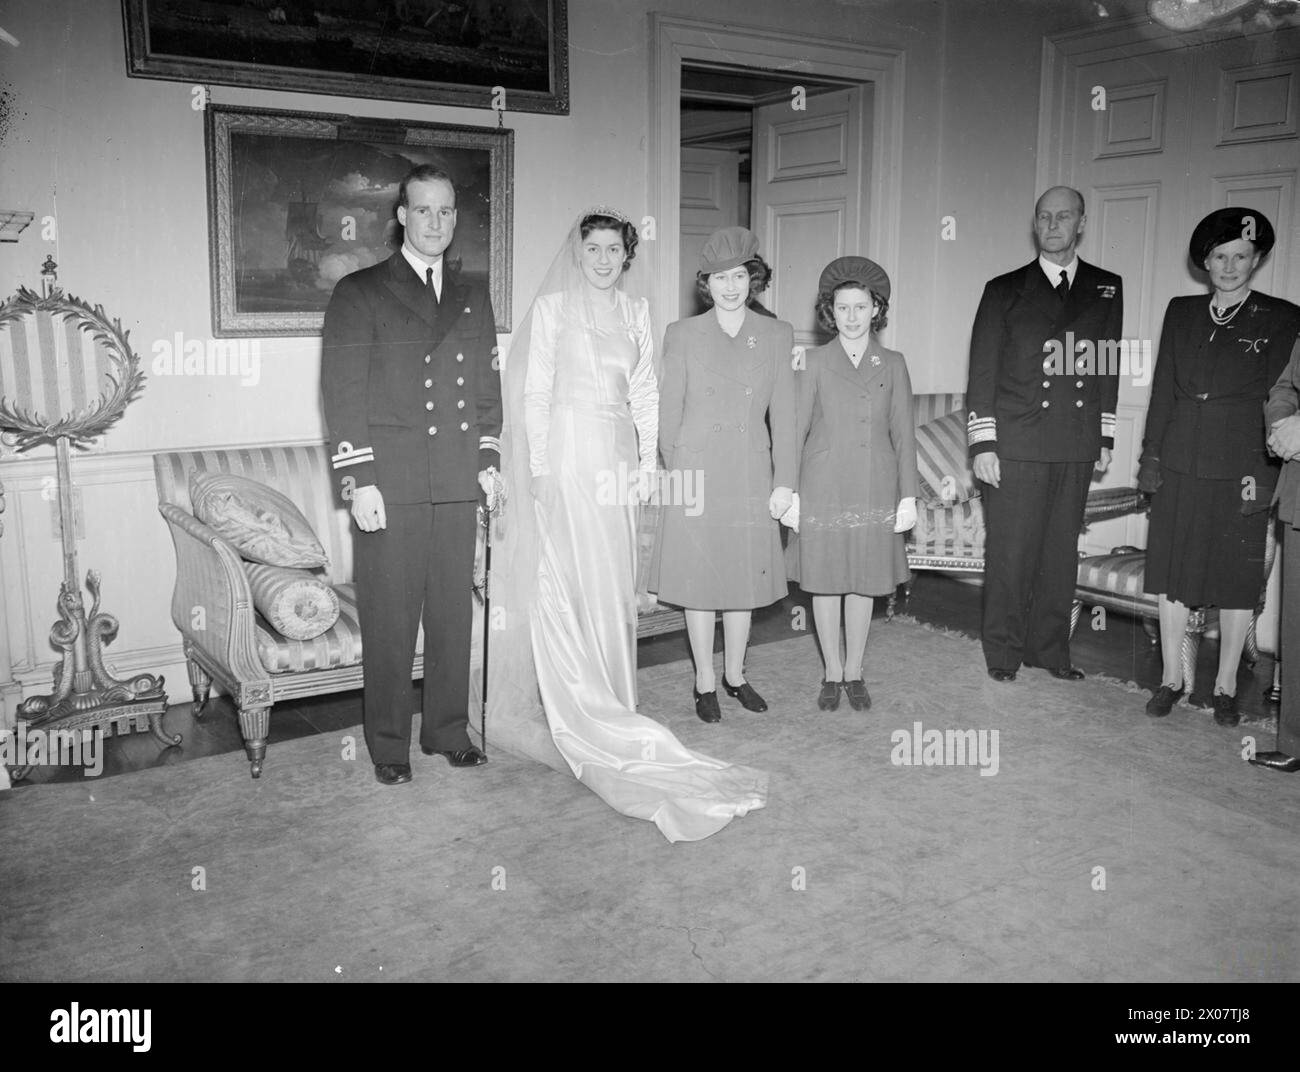 ADMIRAL'S SON WEDS EARL'S DAUGHTER. 10 FEBRUARY 1944, ADMIRALTY HOUSE. AT THE RECEPTION ATTENDED BY PRINCESS ELIZABETH AND PRINCESS MARGARET, WHICH FOLLOWED THE WEDDING AT WESTMINSTER ABBEY OF LIEUTENANT CHRISTOPHER WAKE-WALKER, RN, SON OF VICE ADMIRAL SIR FREDERICK AND LADY WAKE-WALKER, AND THIRD OFFICER LADY ANNE SPENCER, WRNS, DAUGHTER OF EARL AND COUNTESS SPENCER. - Princess Elizabeth and Princess Margaret with the bride and bridegroom  Wake-Walker, Christopher Baldwin Hughes, Spencer, Anne, Wake-Walker, William Frederic, Elizabeth II, Queen, Margaret, Princess Stock Photo